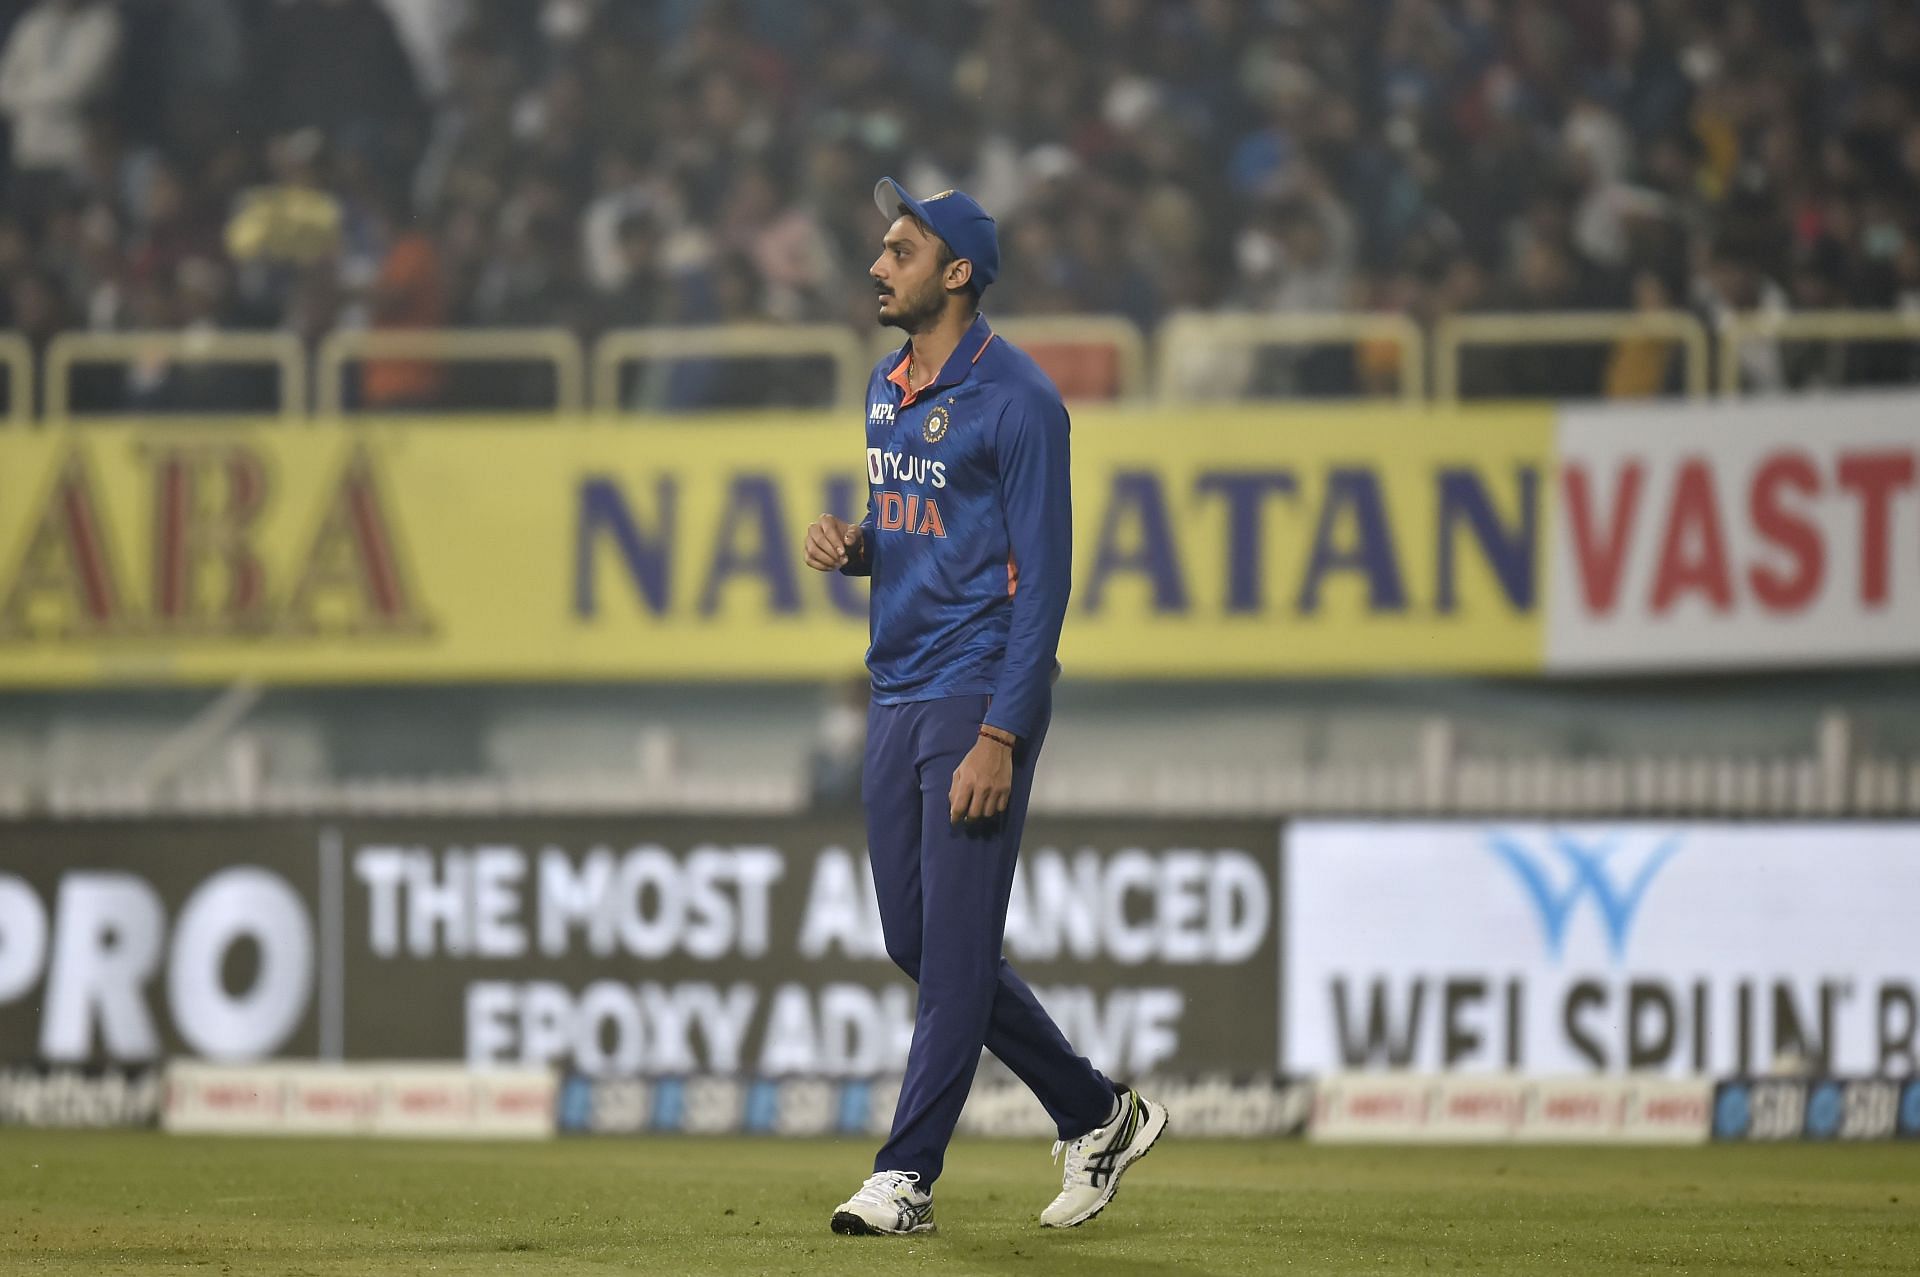 Axar Patel adds balance to India (Image courtesy: Getty)